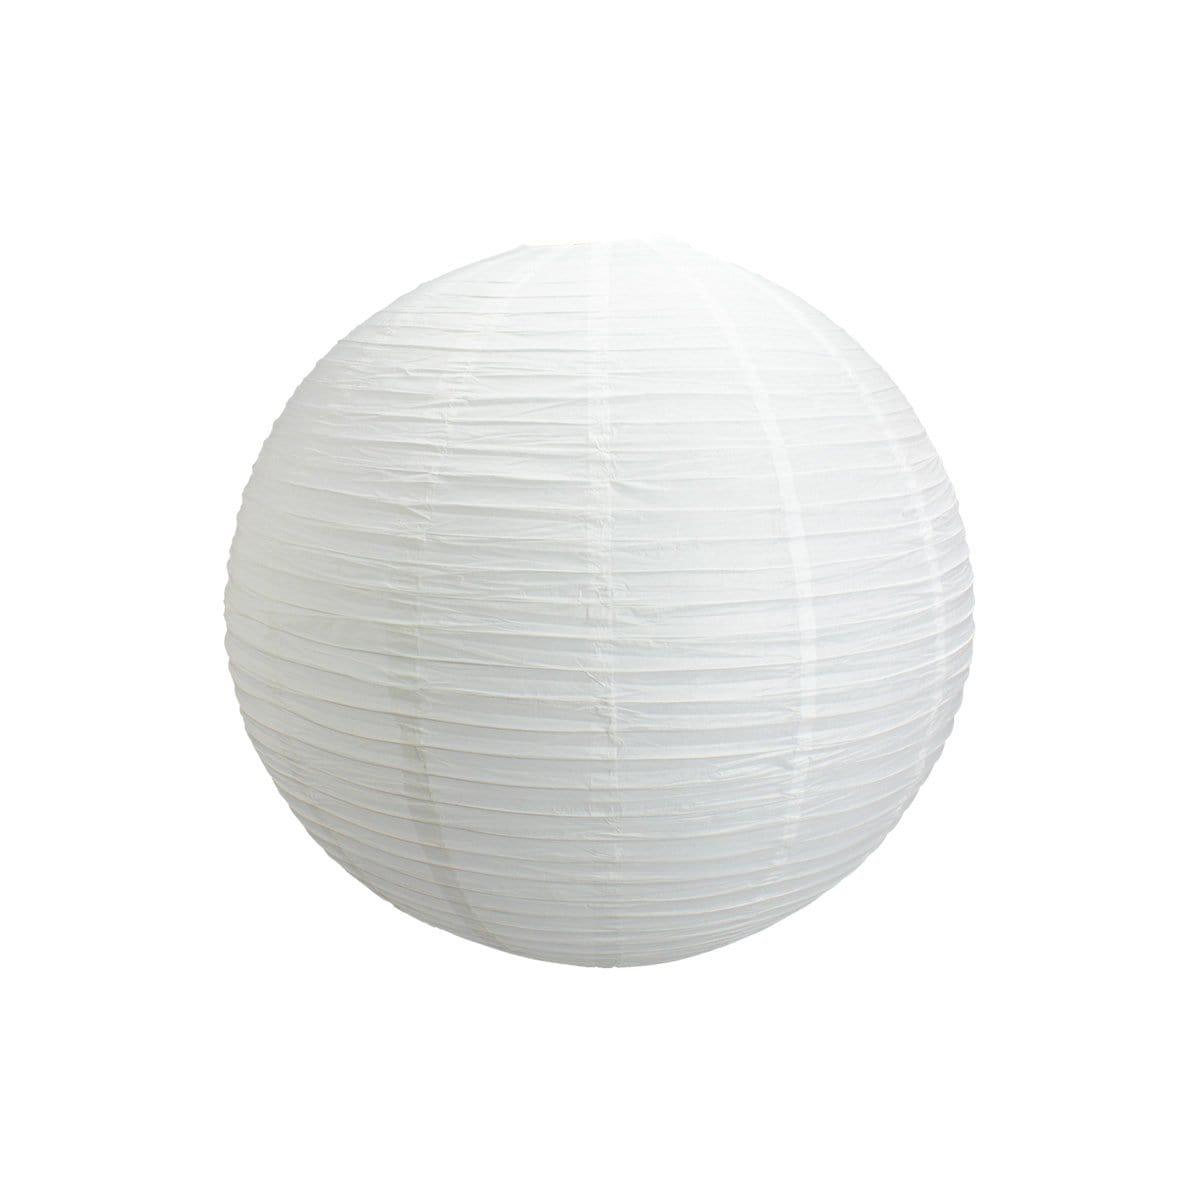 Buy Decorations Paper Lantern - White 12 in. sold at Party Expert